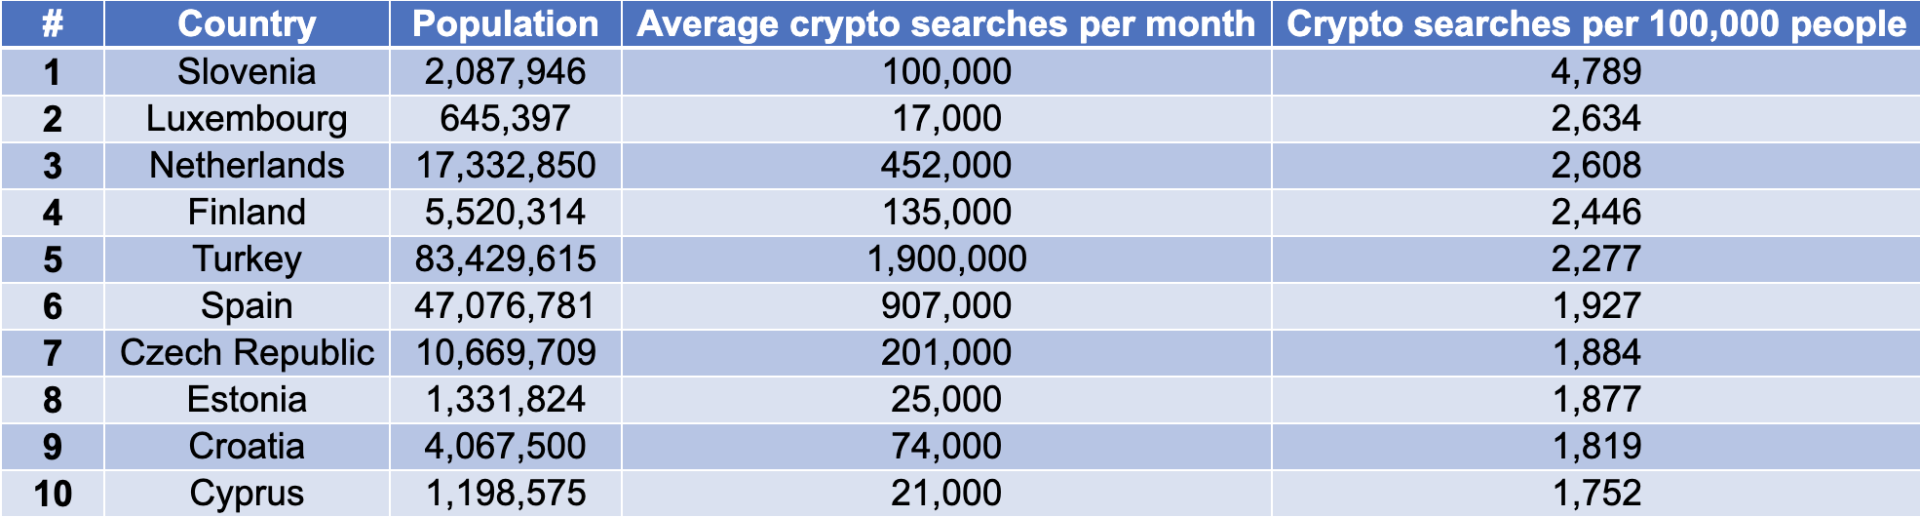 Average_Crypto_Searches_Per_Month.png